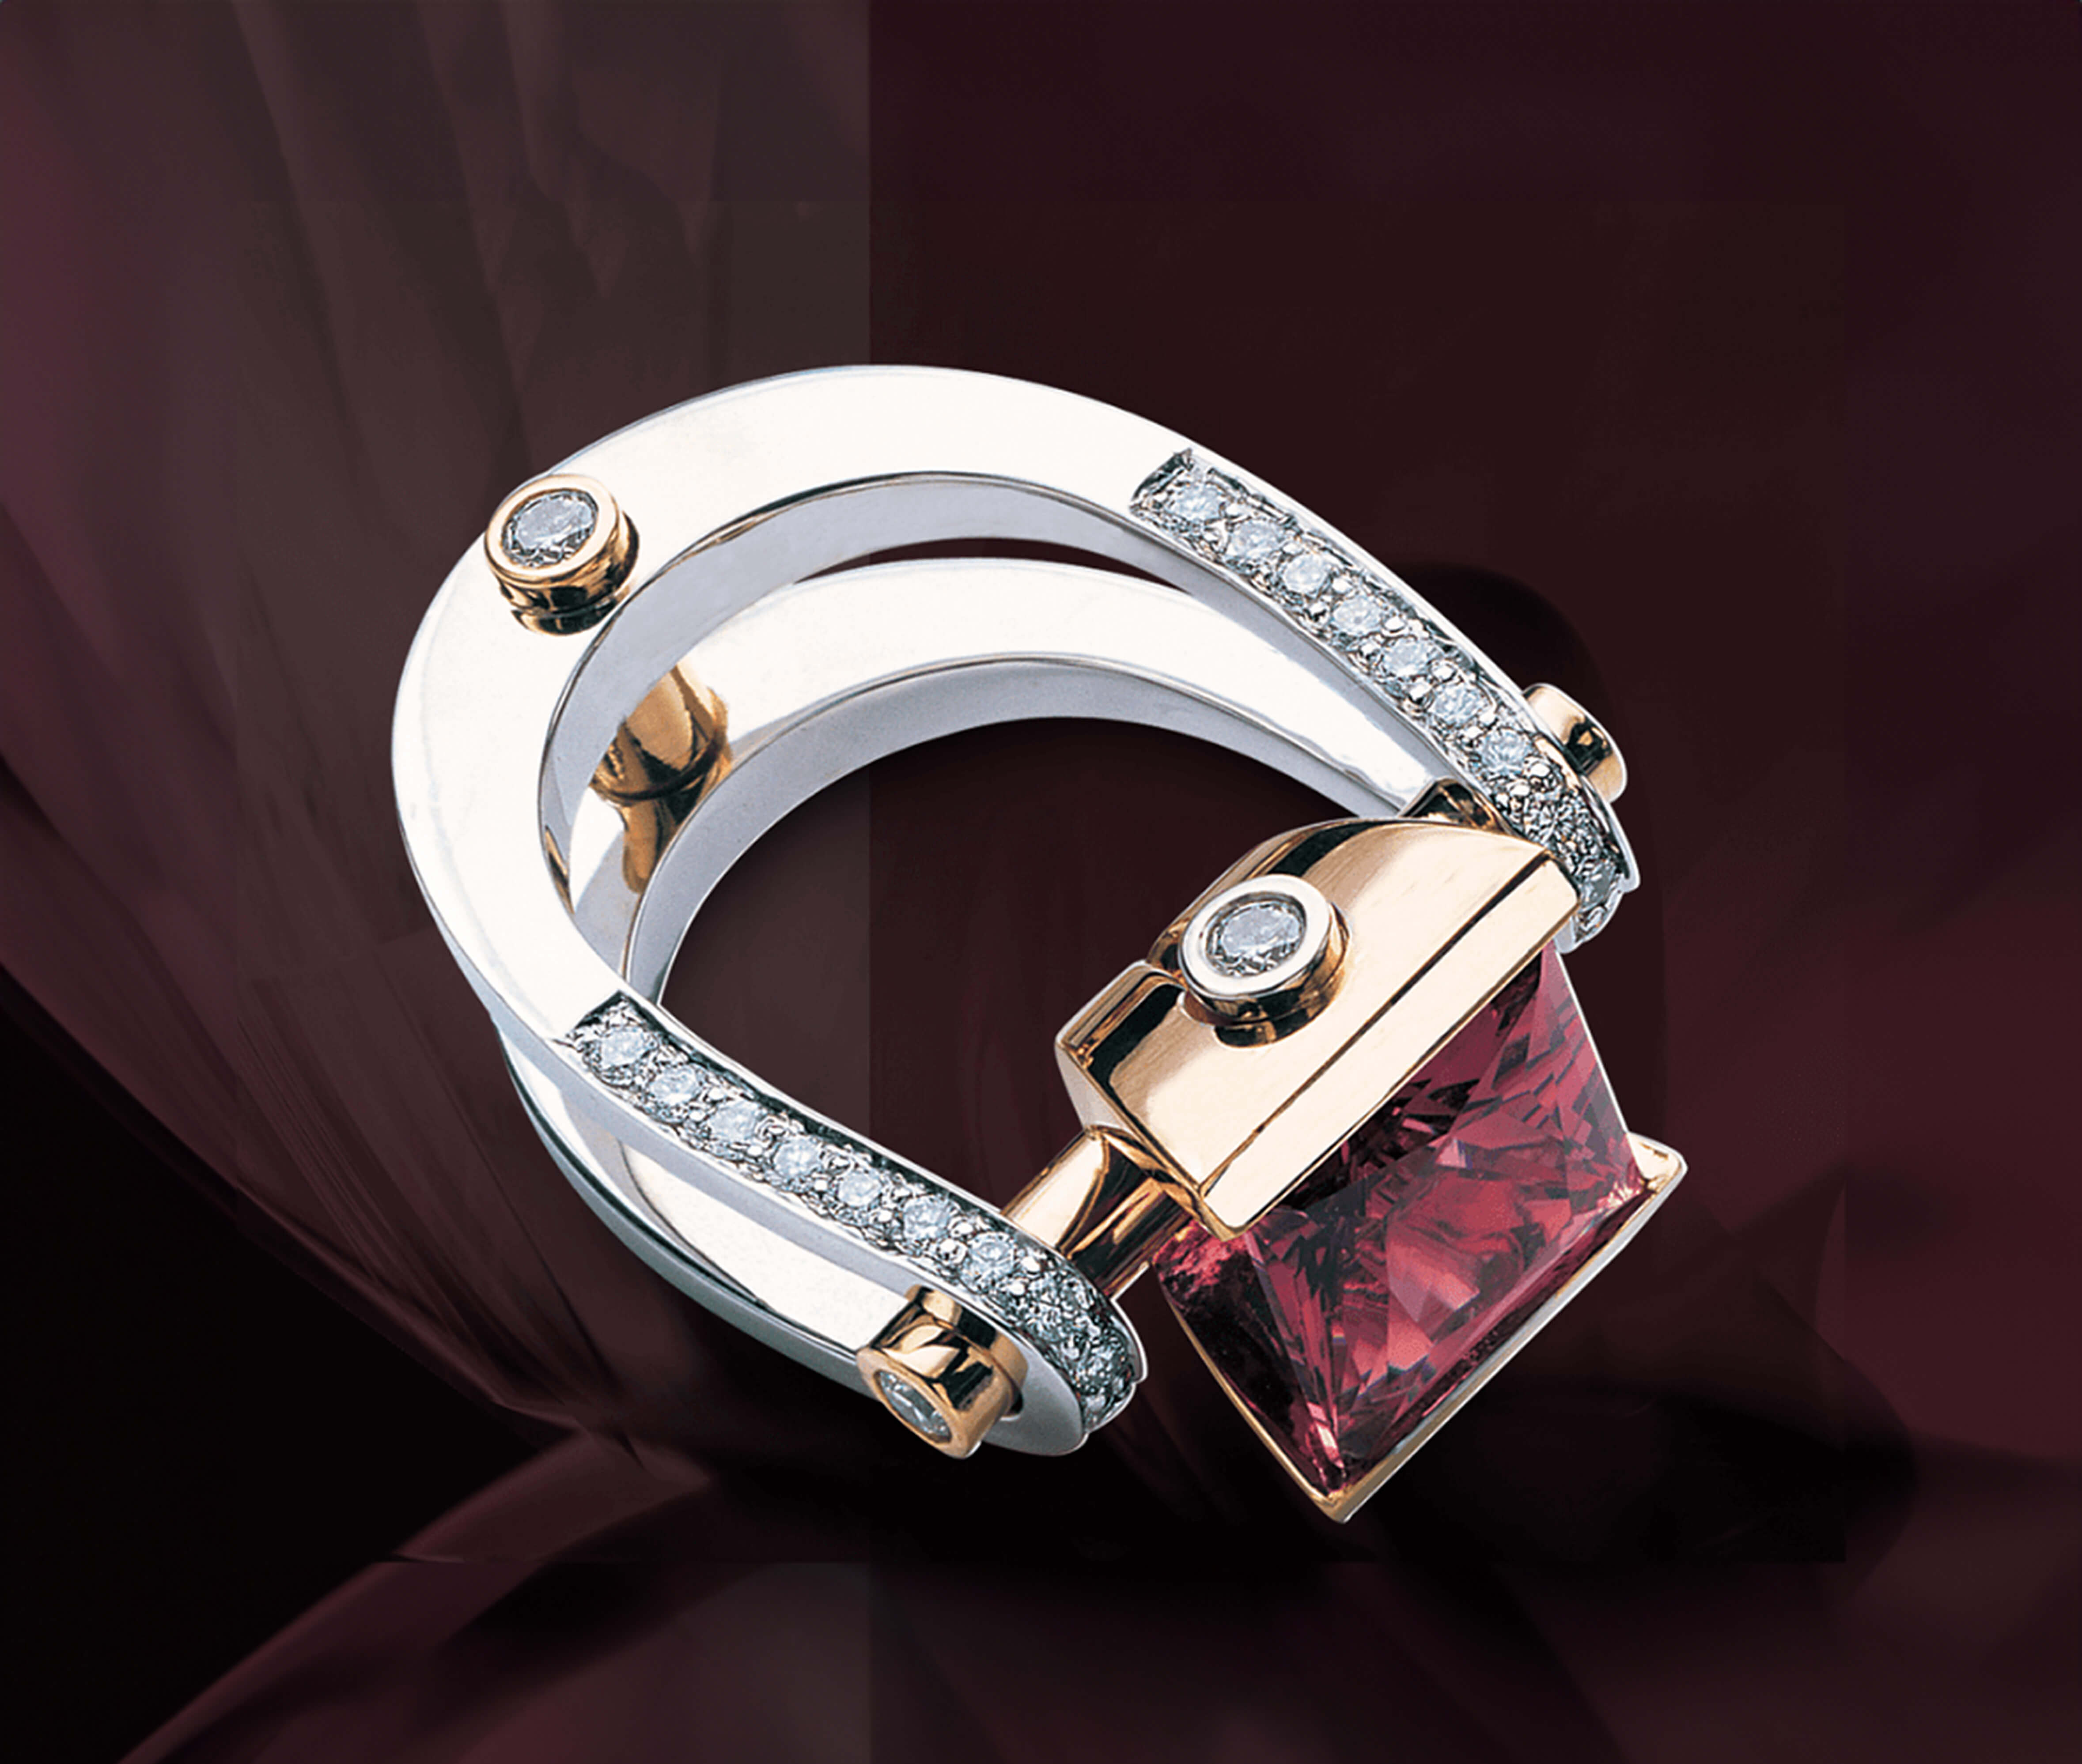 A ring with a square red stone and diamonds on a red background. The ring is custom-designed by Garo Demirjian.